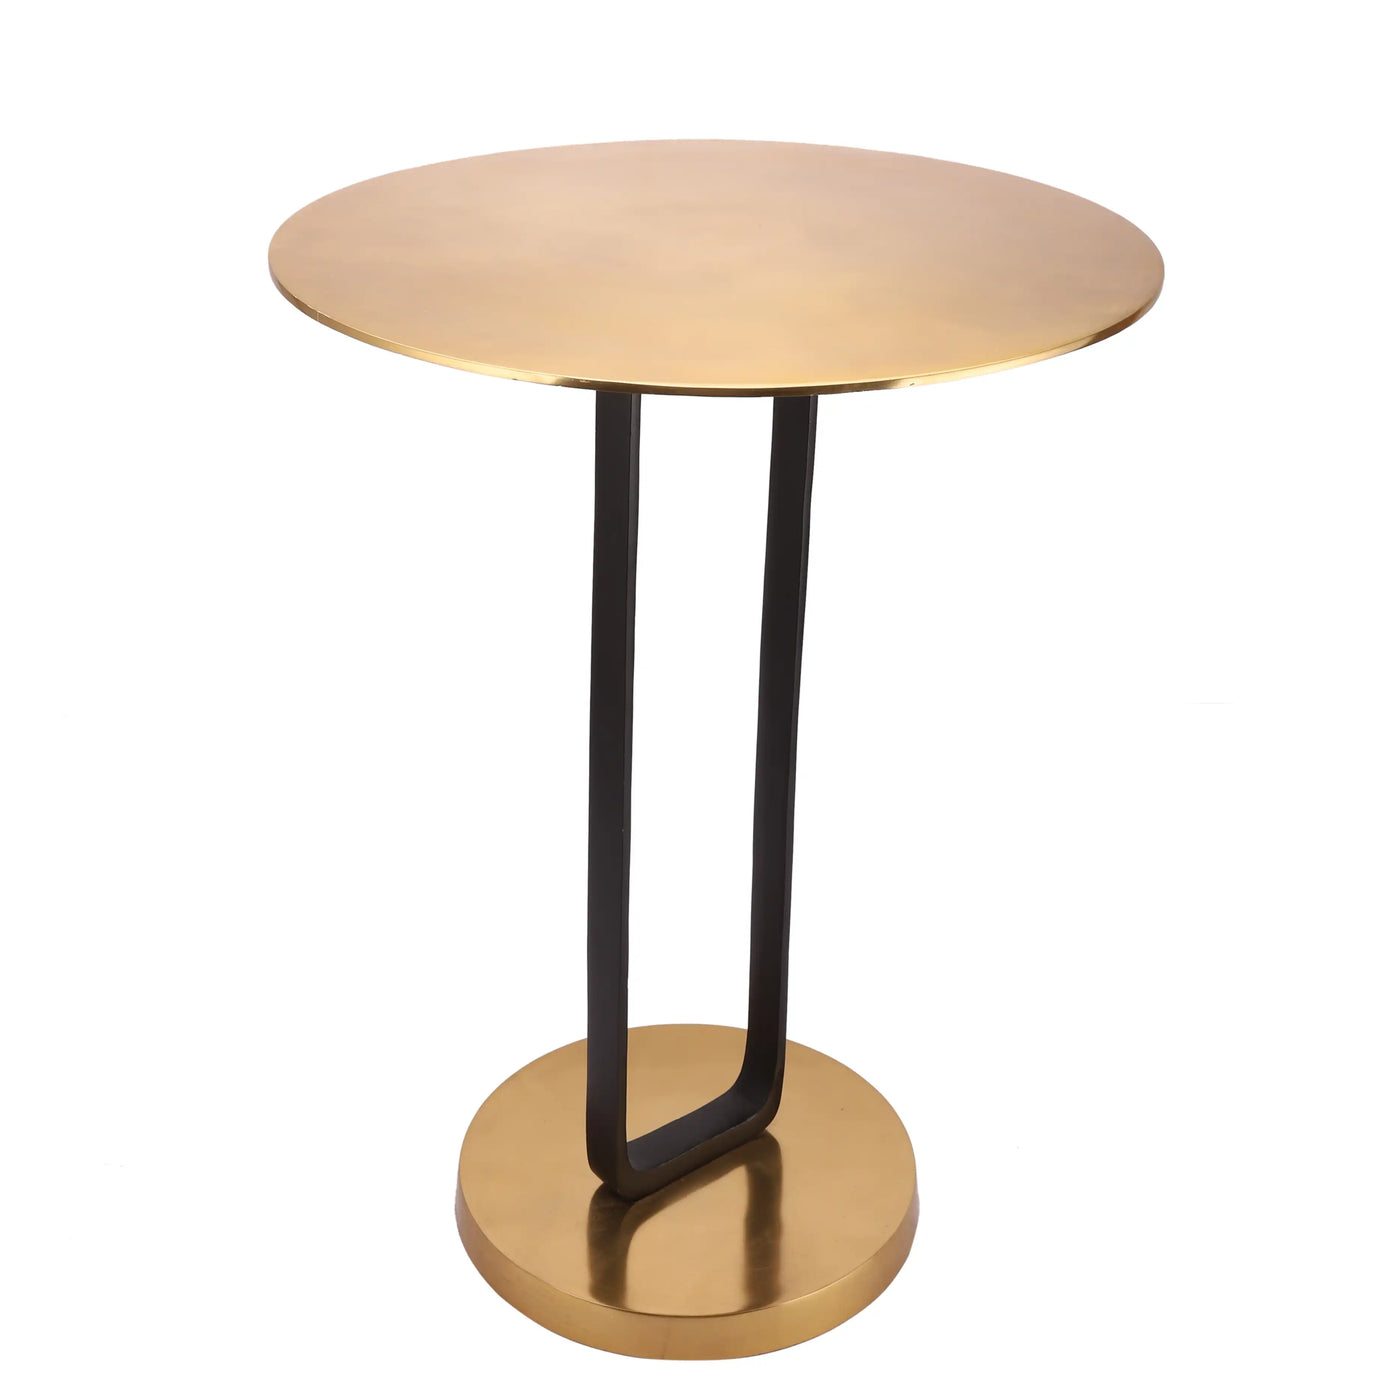 Irwin's Rectangle Table Gold top & base with Black Body 53-182-58-2